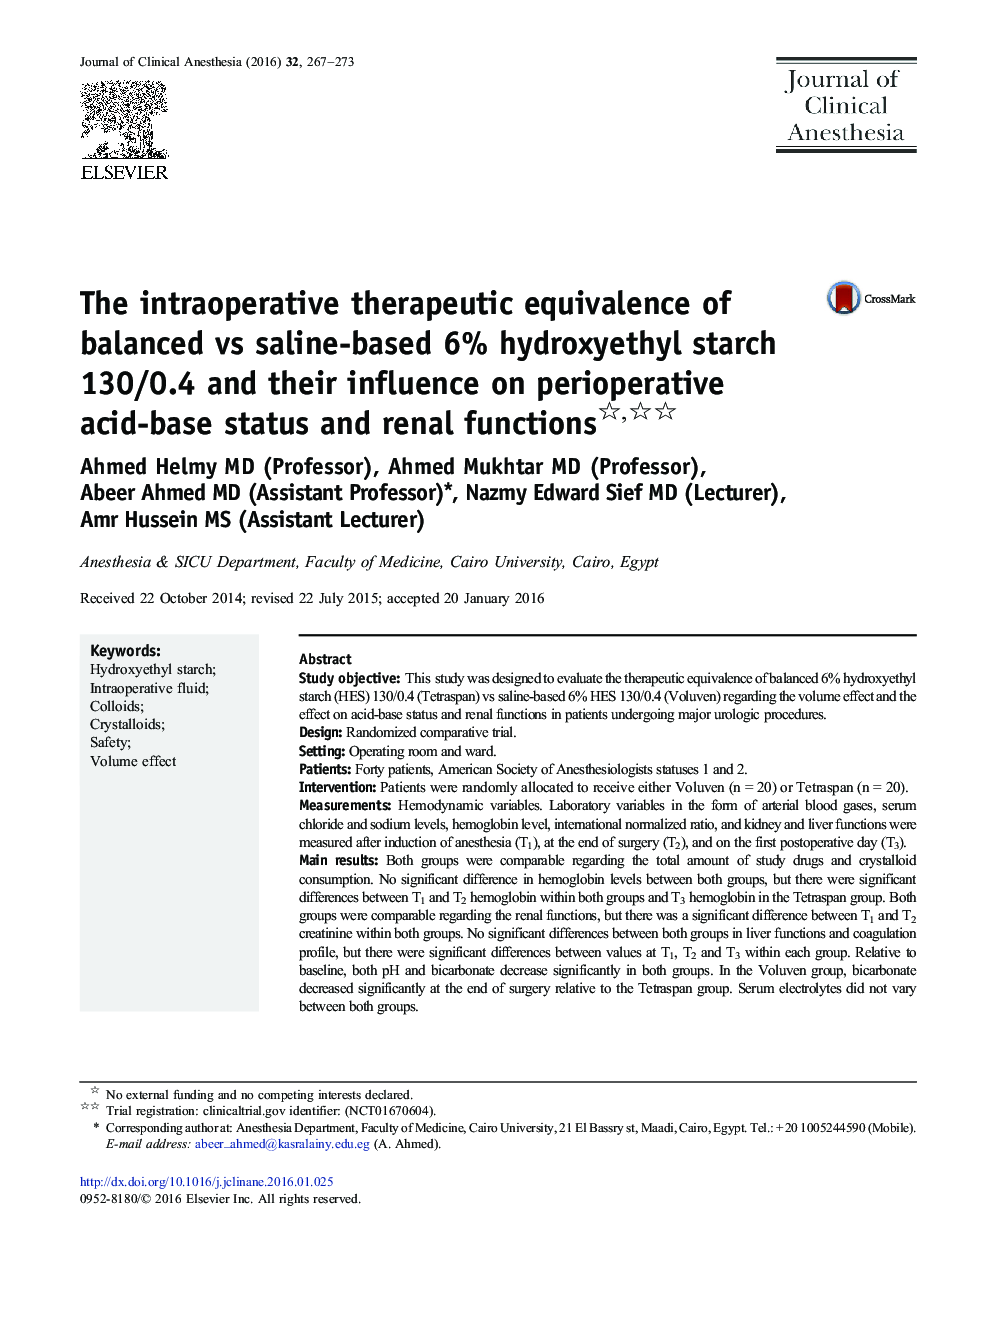 The intraoperative therapeutic equivalence of balanced vs saline-based 6% hydroxyethyl starch 130/0.4 and their influence on perioperative acid-base status and renal functions